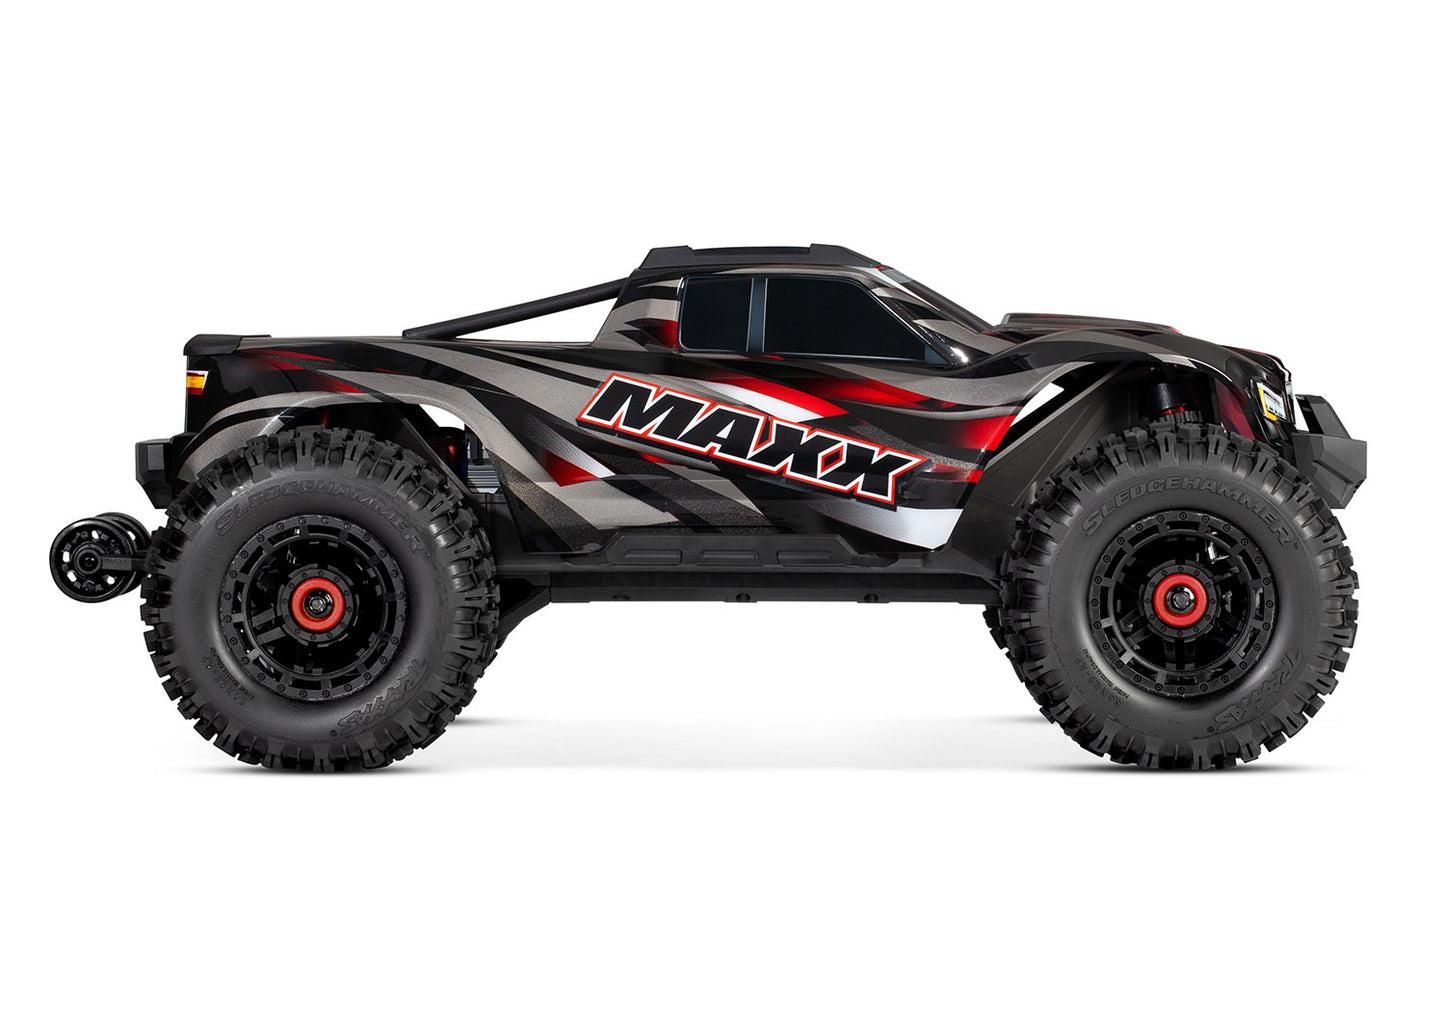 89086-4-RED 1/10 Scale Maxx with WideMaxx Monster truck